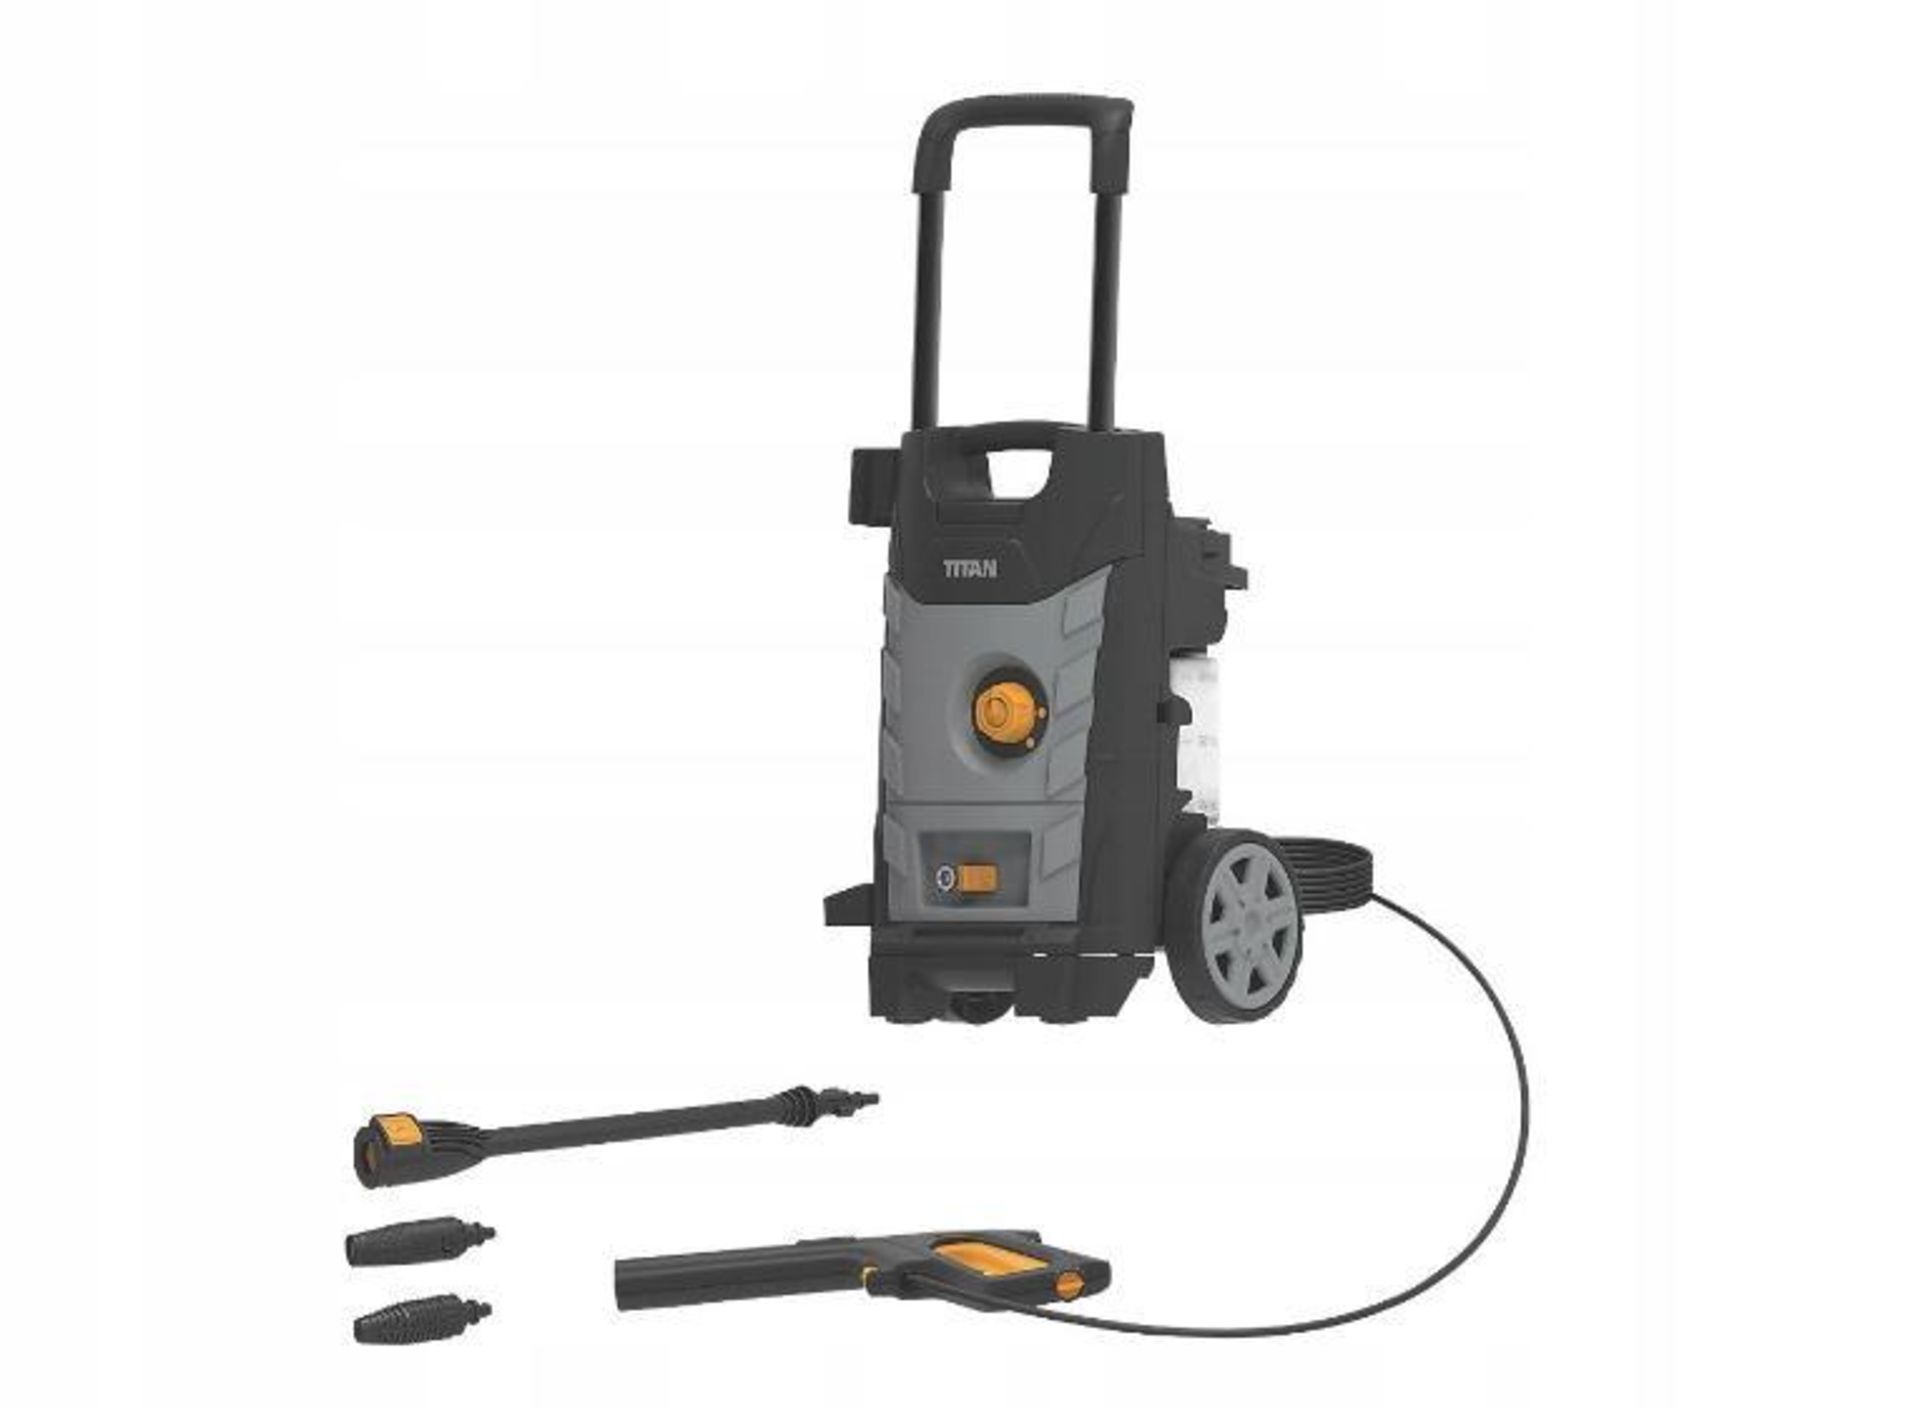 Titan 140 Bar 1800 W Pressure Washer (LOCATION – H/S R 3.4) Compact washer with space-saving - Image 2 of 2